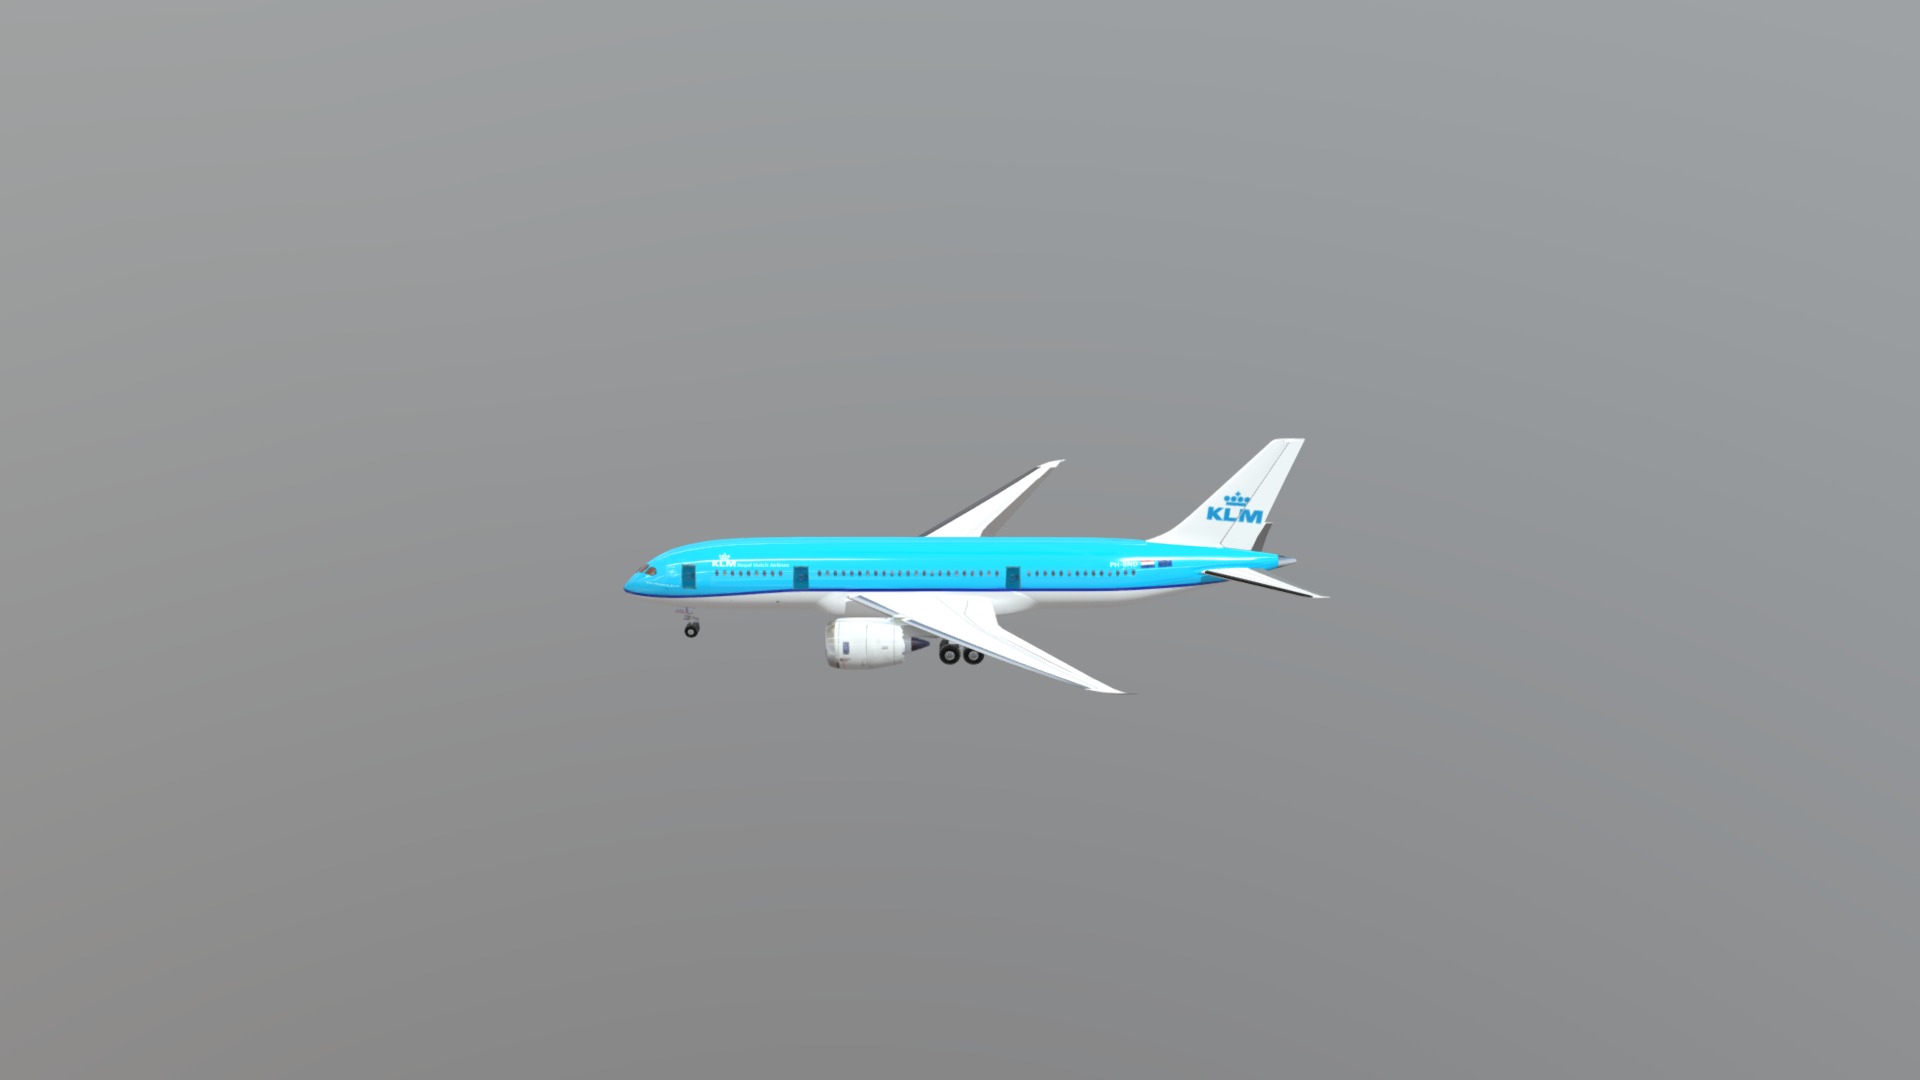 3D model Boeing B-787 Dreamliner - This is a 3D model of the Boeing B-787 Dreamliner. The 3D model is about a plane flying in the sky.